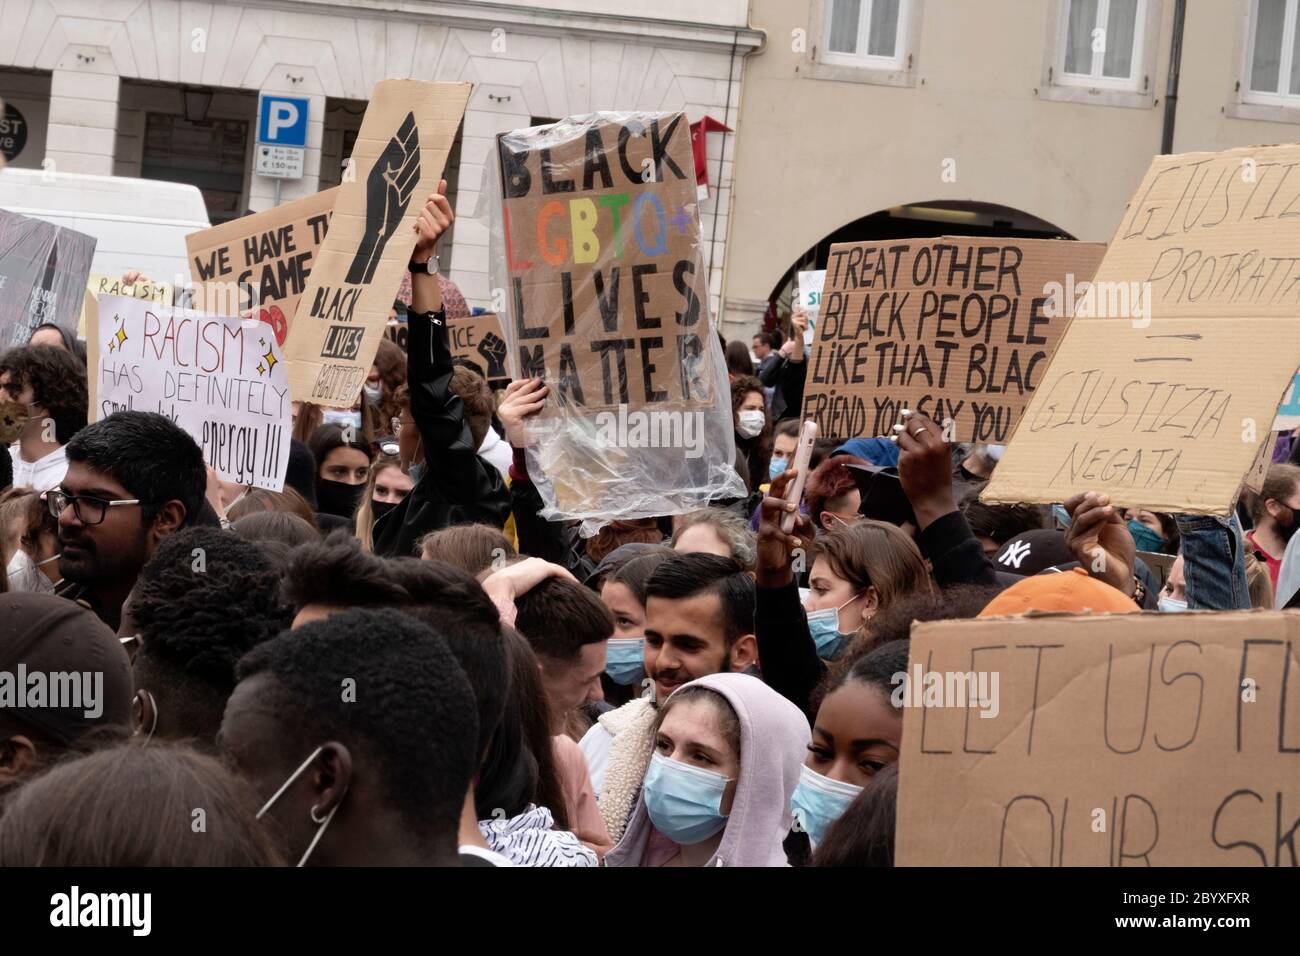 Udine, Italy. 10th June, 2020. Protestors demonstrate in solidarity with Black Lives Matter movement in Piazza XX Settembre, Udine. All over the world, solidarity anti-racist protest sparked after the death of George Floyd in Minneapolis. (Photo by Francesco Boscarol/Pacific Press) Credit: Pacific Press Agency/Alamy Live News Stock Photo